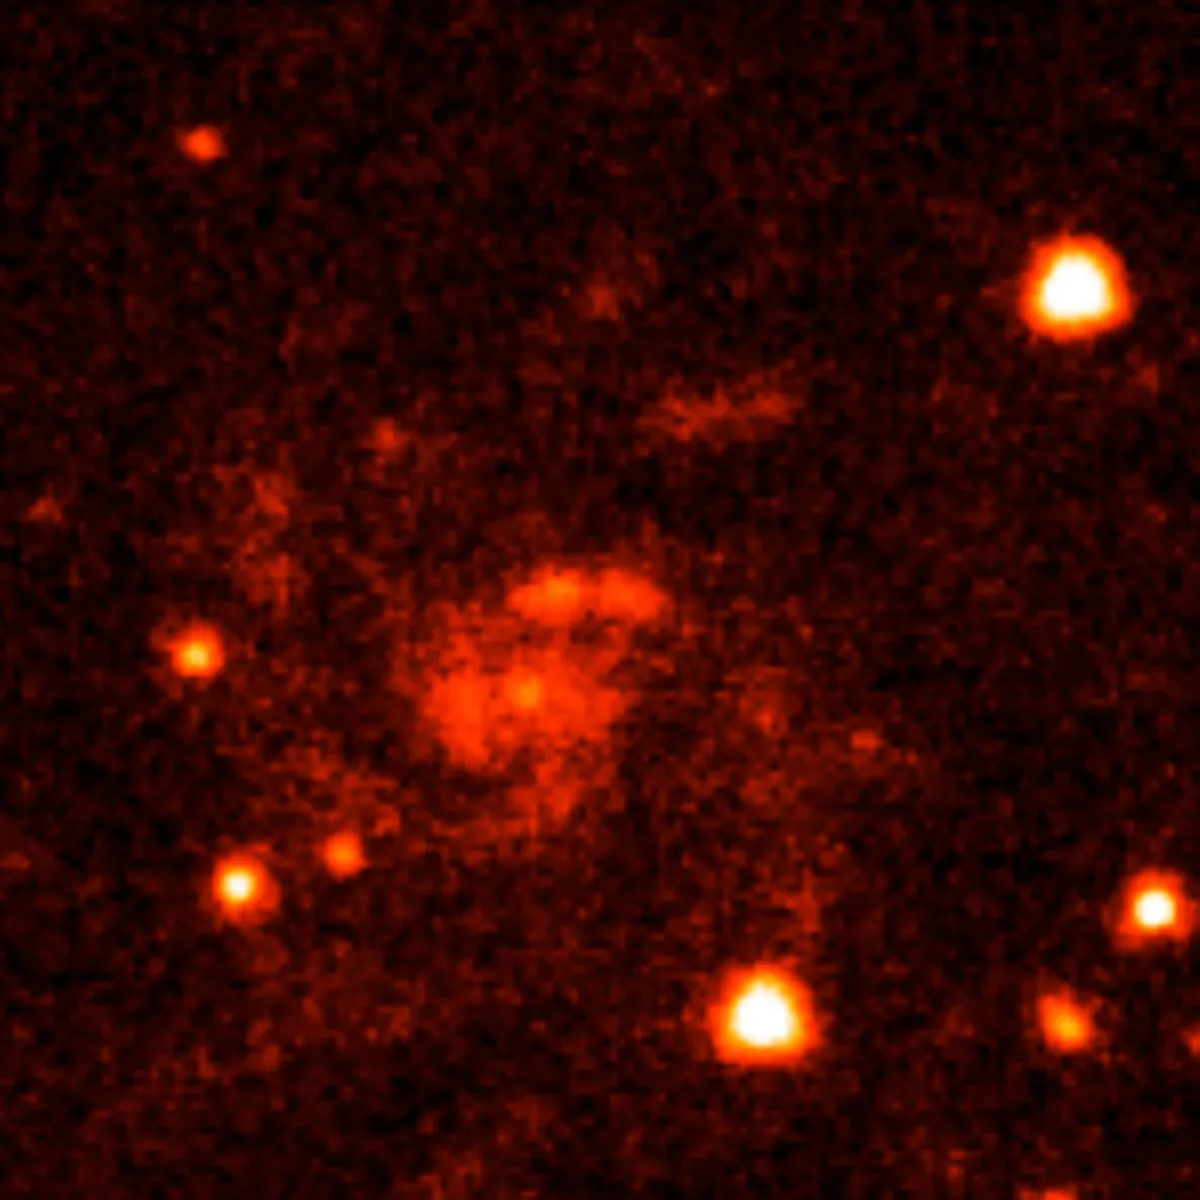 A Hubble Space Telescope image showing a number of galaxies thought to host bright gamma-ray bursts. Credit: NASA, ESA, A. Fruchter (STScI), and the GOSH Collaboration